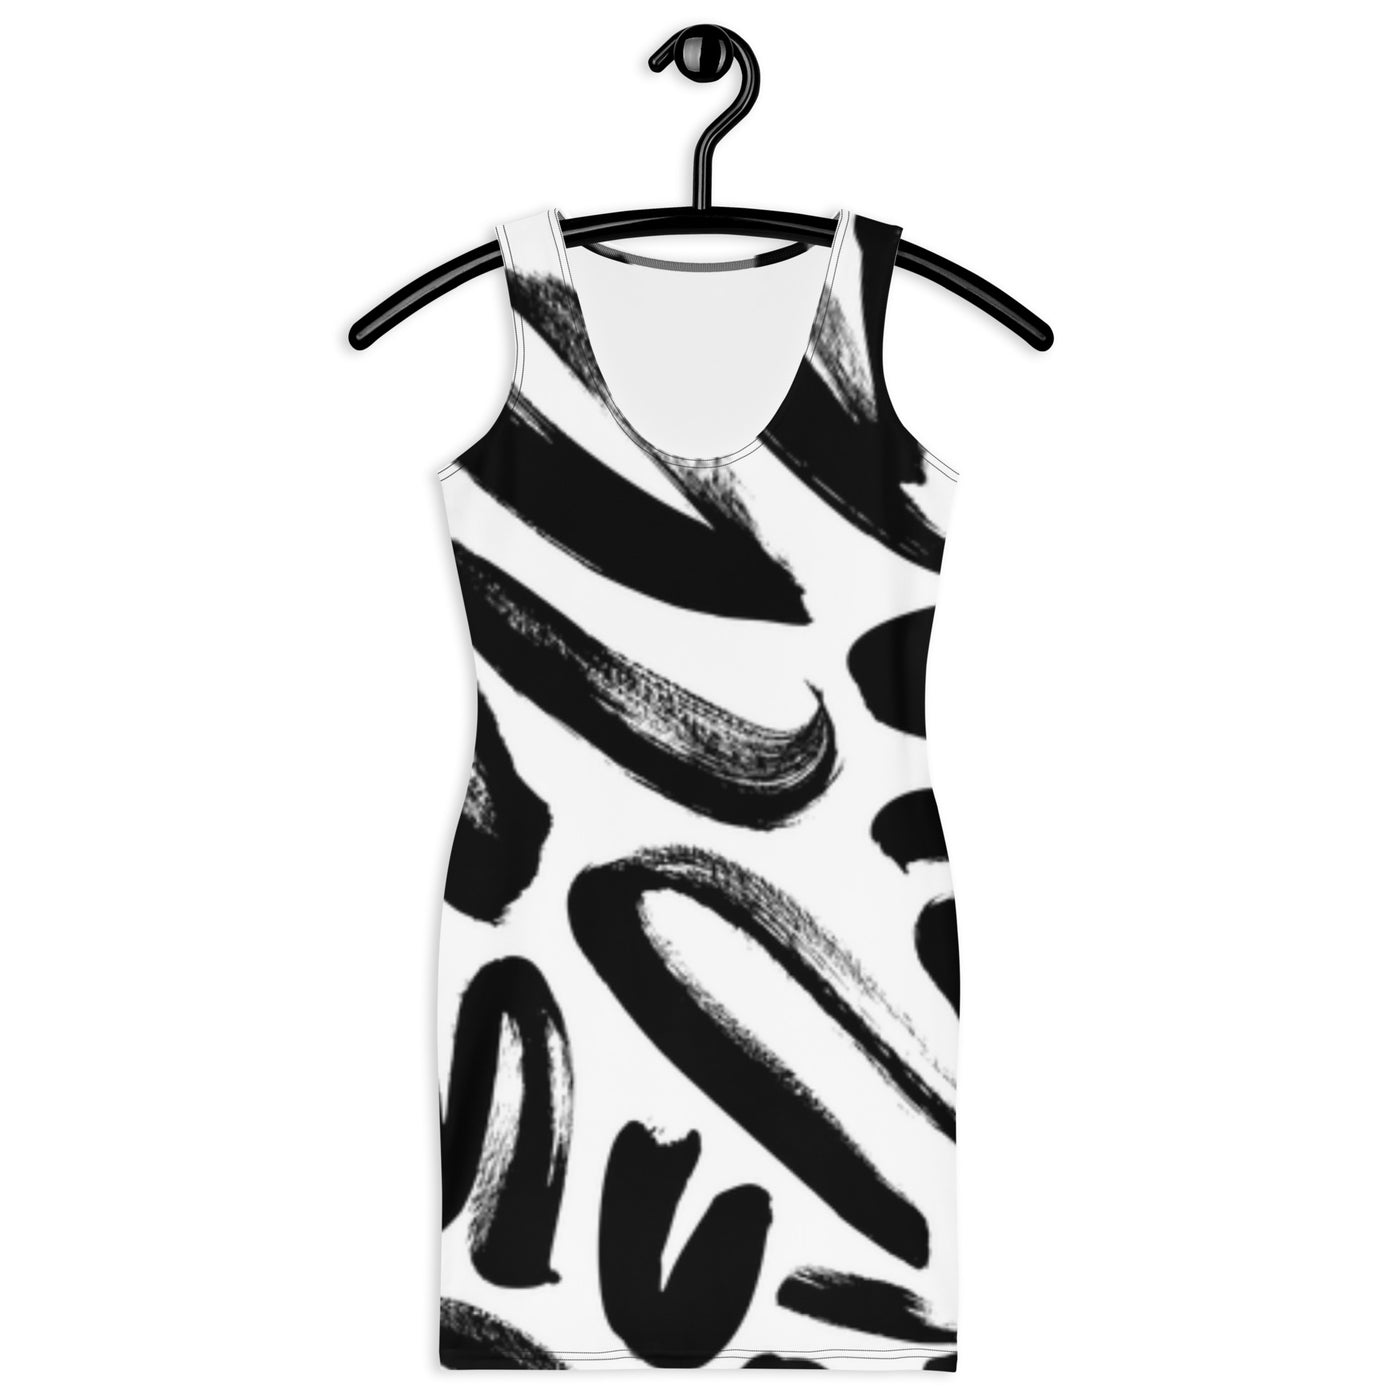 Against the lines Dress - NoCeilingsClothing